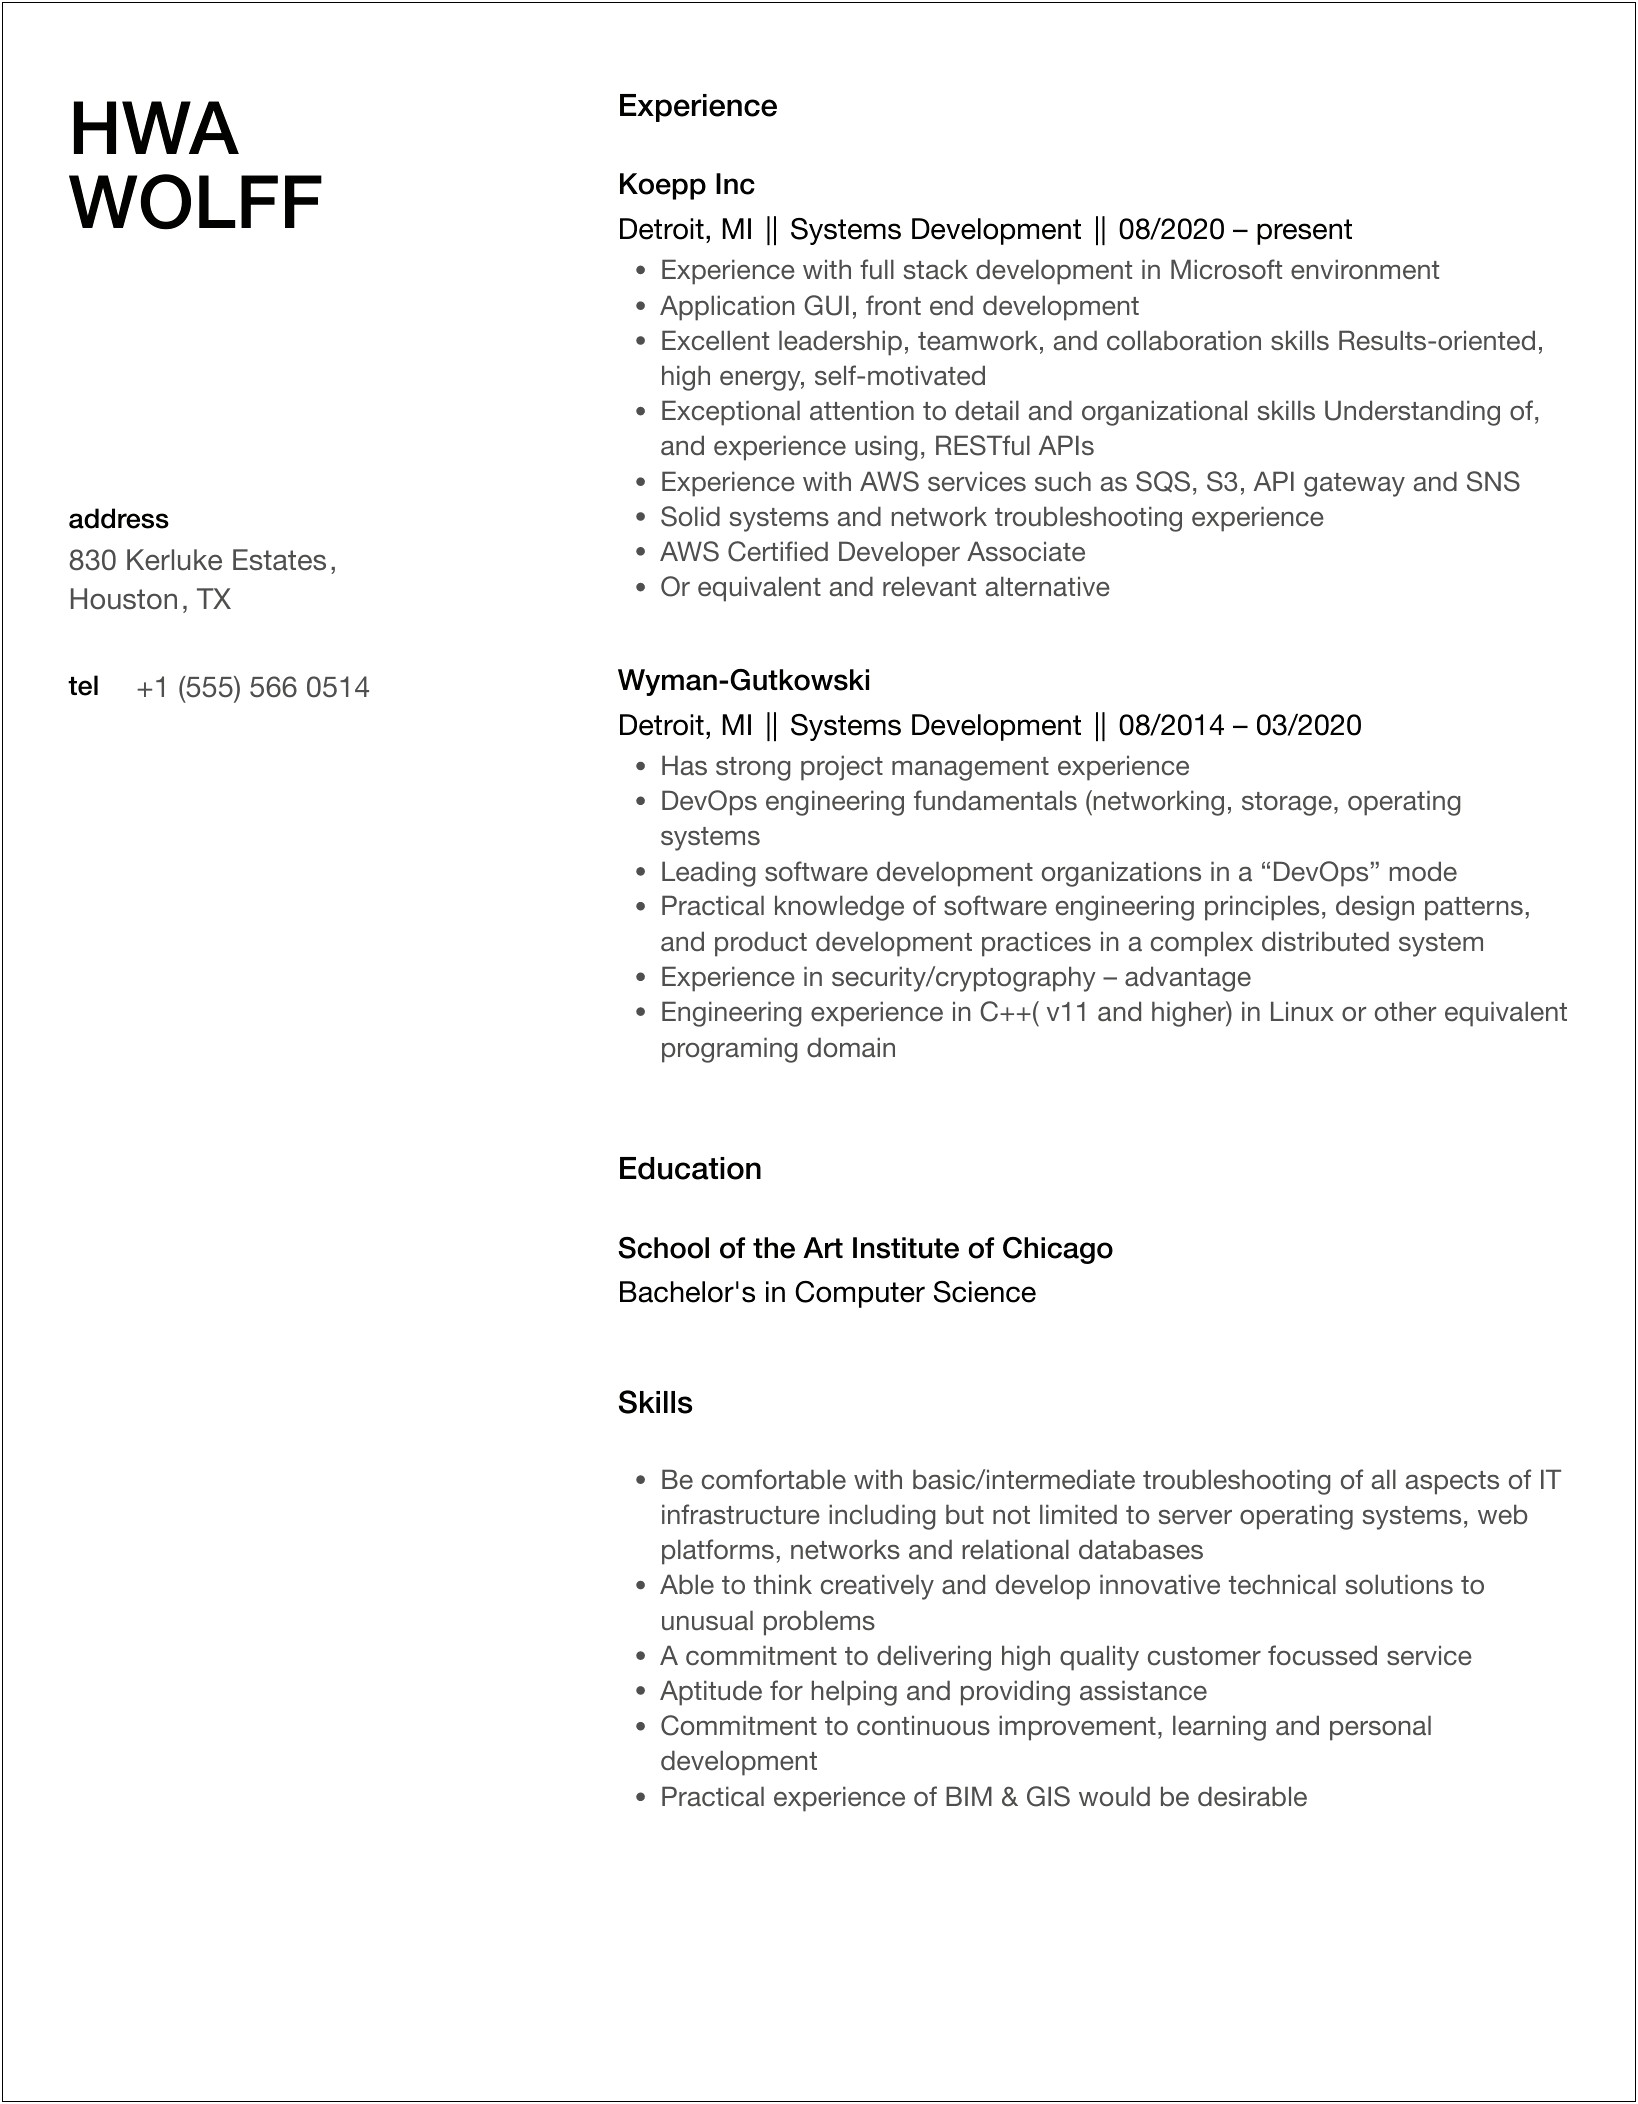 Full Development Life Cycle Experience Resume